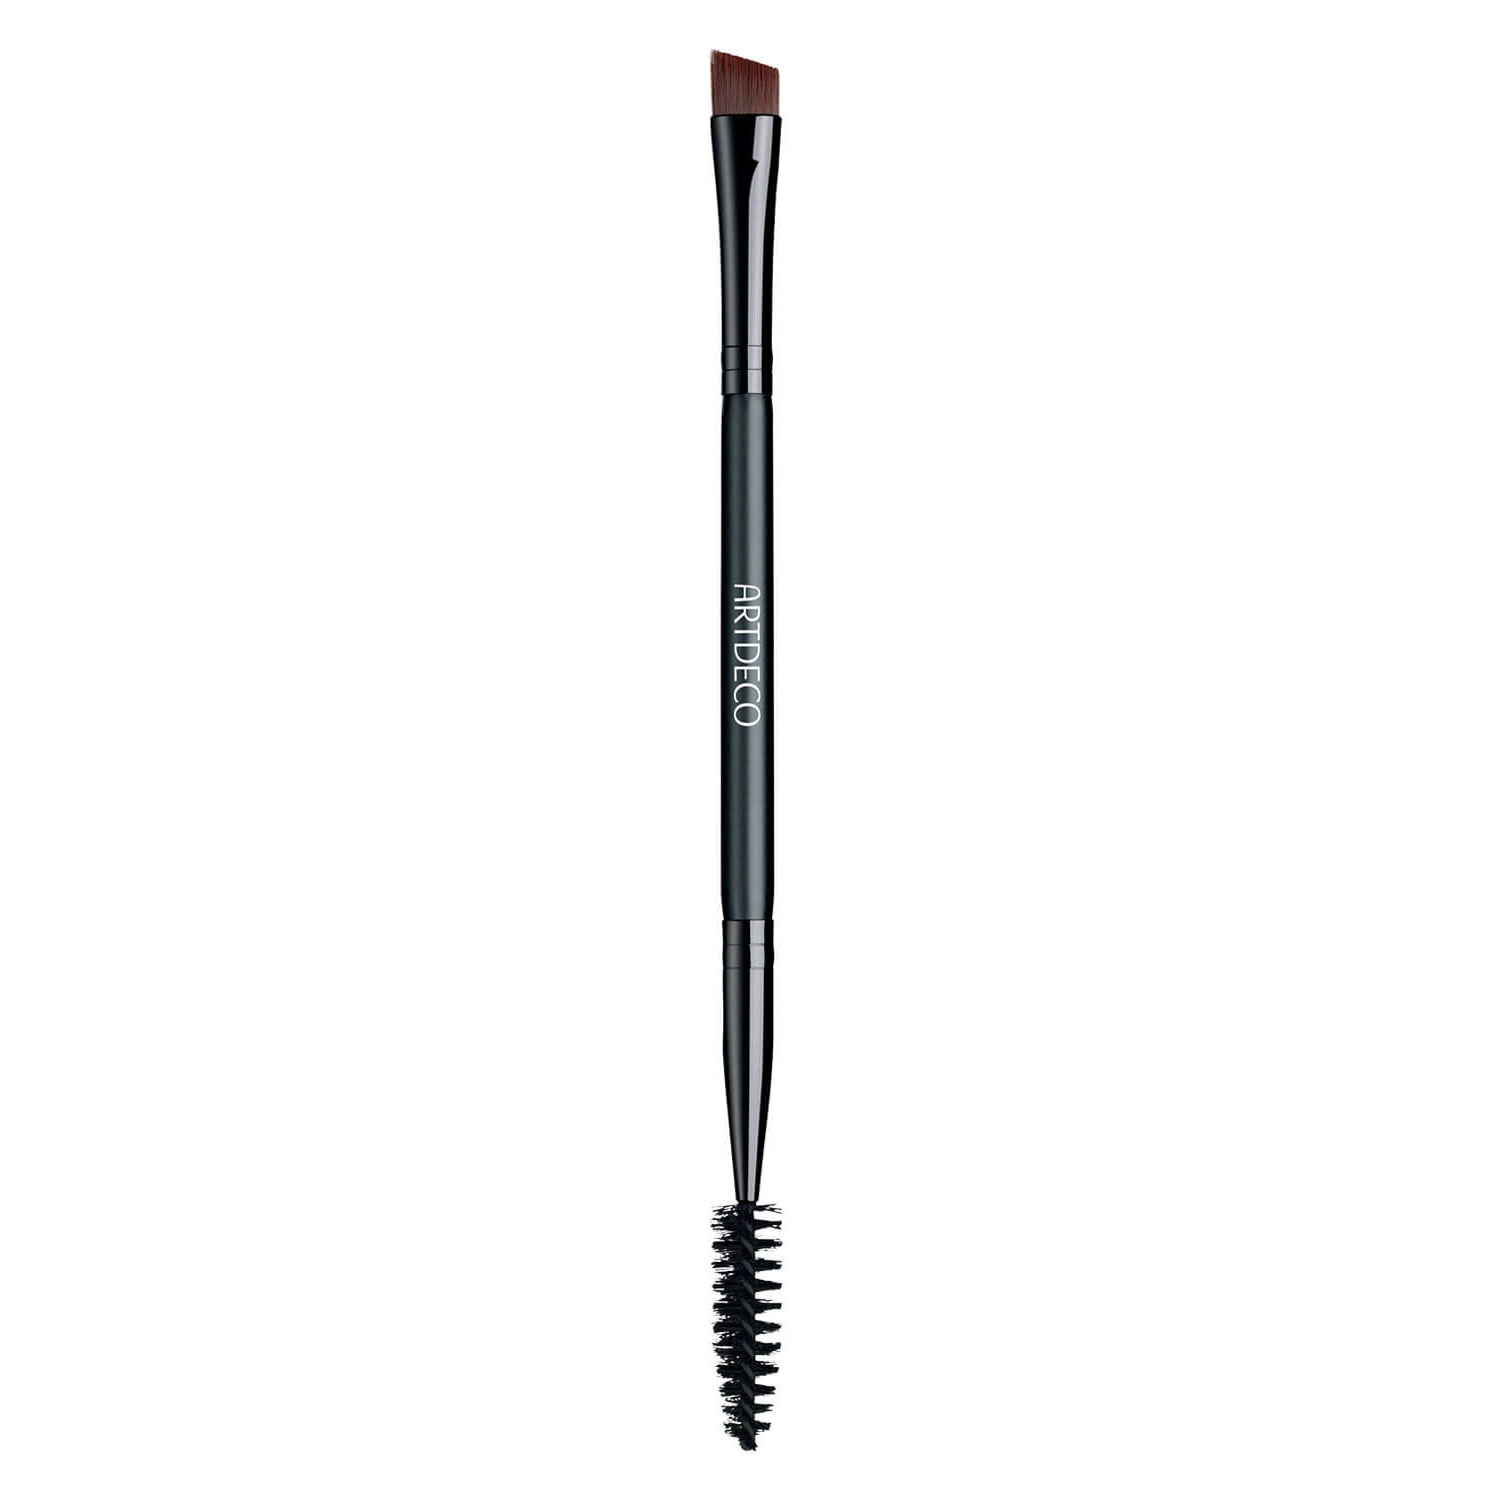 Product image from Artdeco Brows - 2 in 1 Brow Perfector